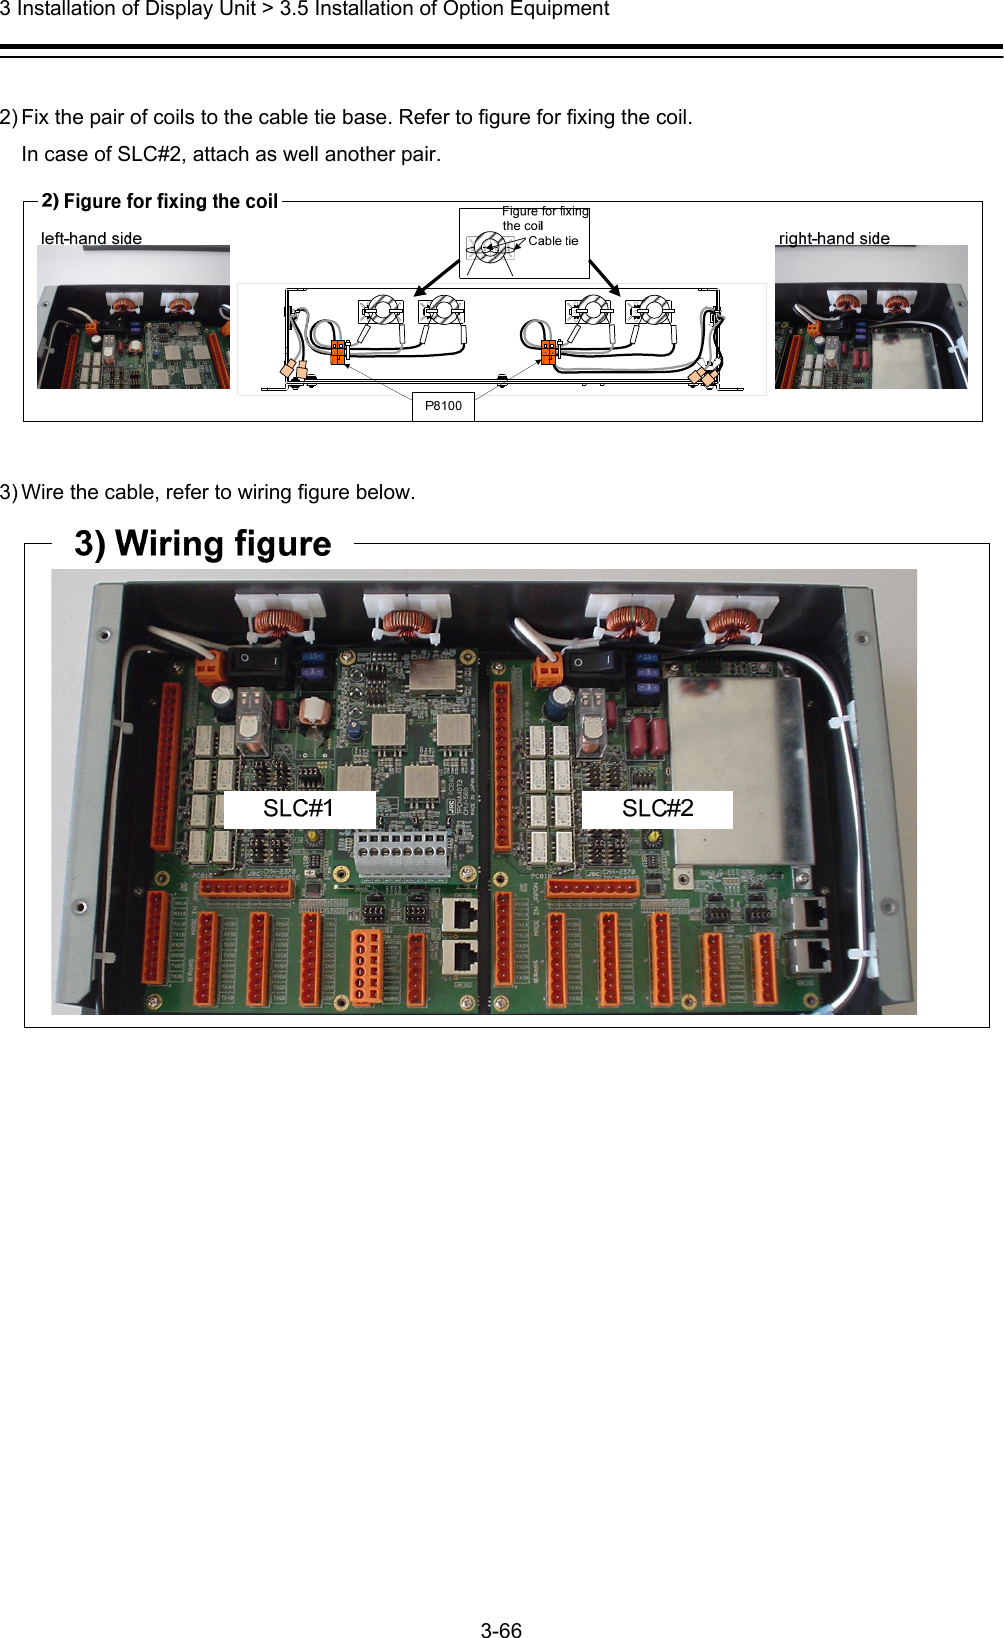  3 Installation of Display Unit &gt; 3.5 Installation of Option Equipment 3-66   2) Fix the pair of coils to the cable tie base. Refer to figure for fixing the coil. In case of SLC#2, attach as well another pair.   3) Wire the cable, refer to wiring figure below.  